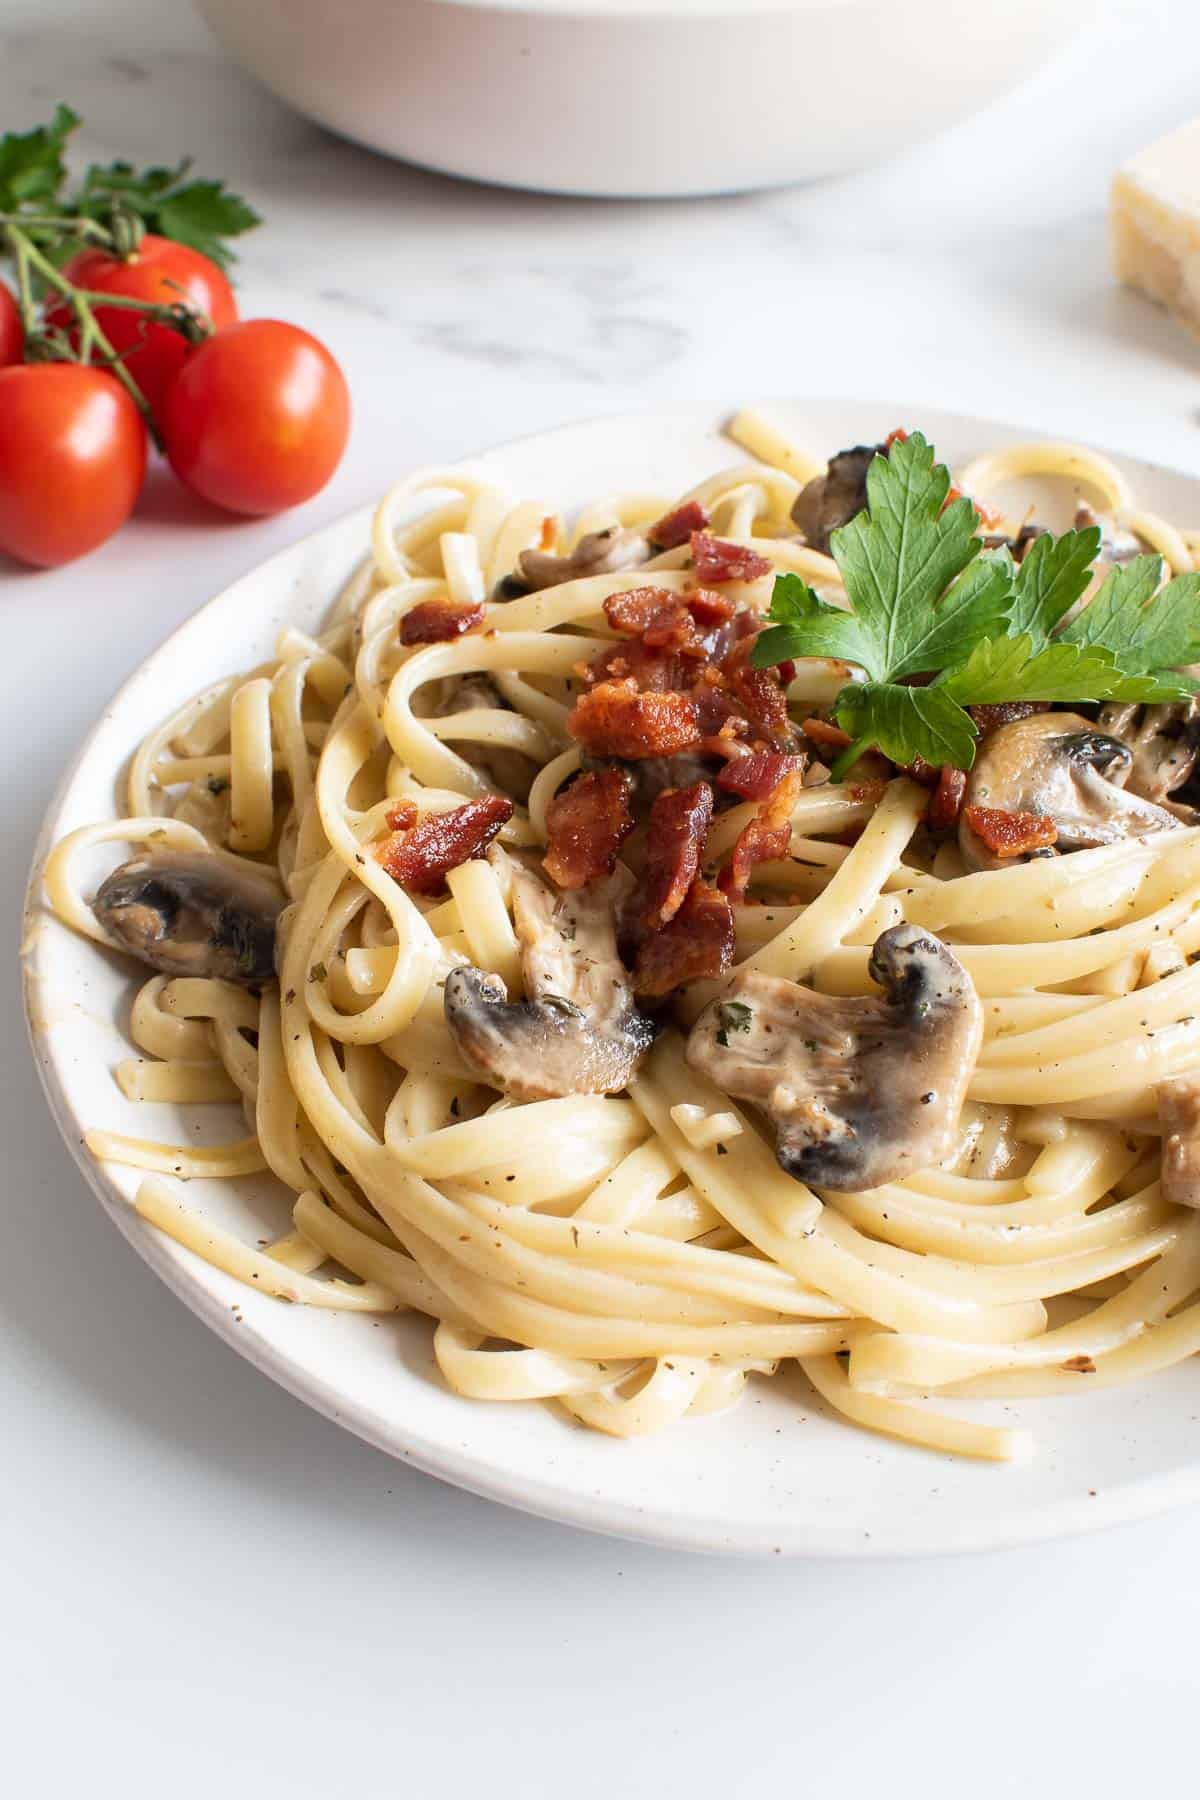 Mushroom and bacon pasta on a plate.